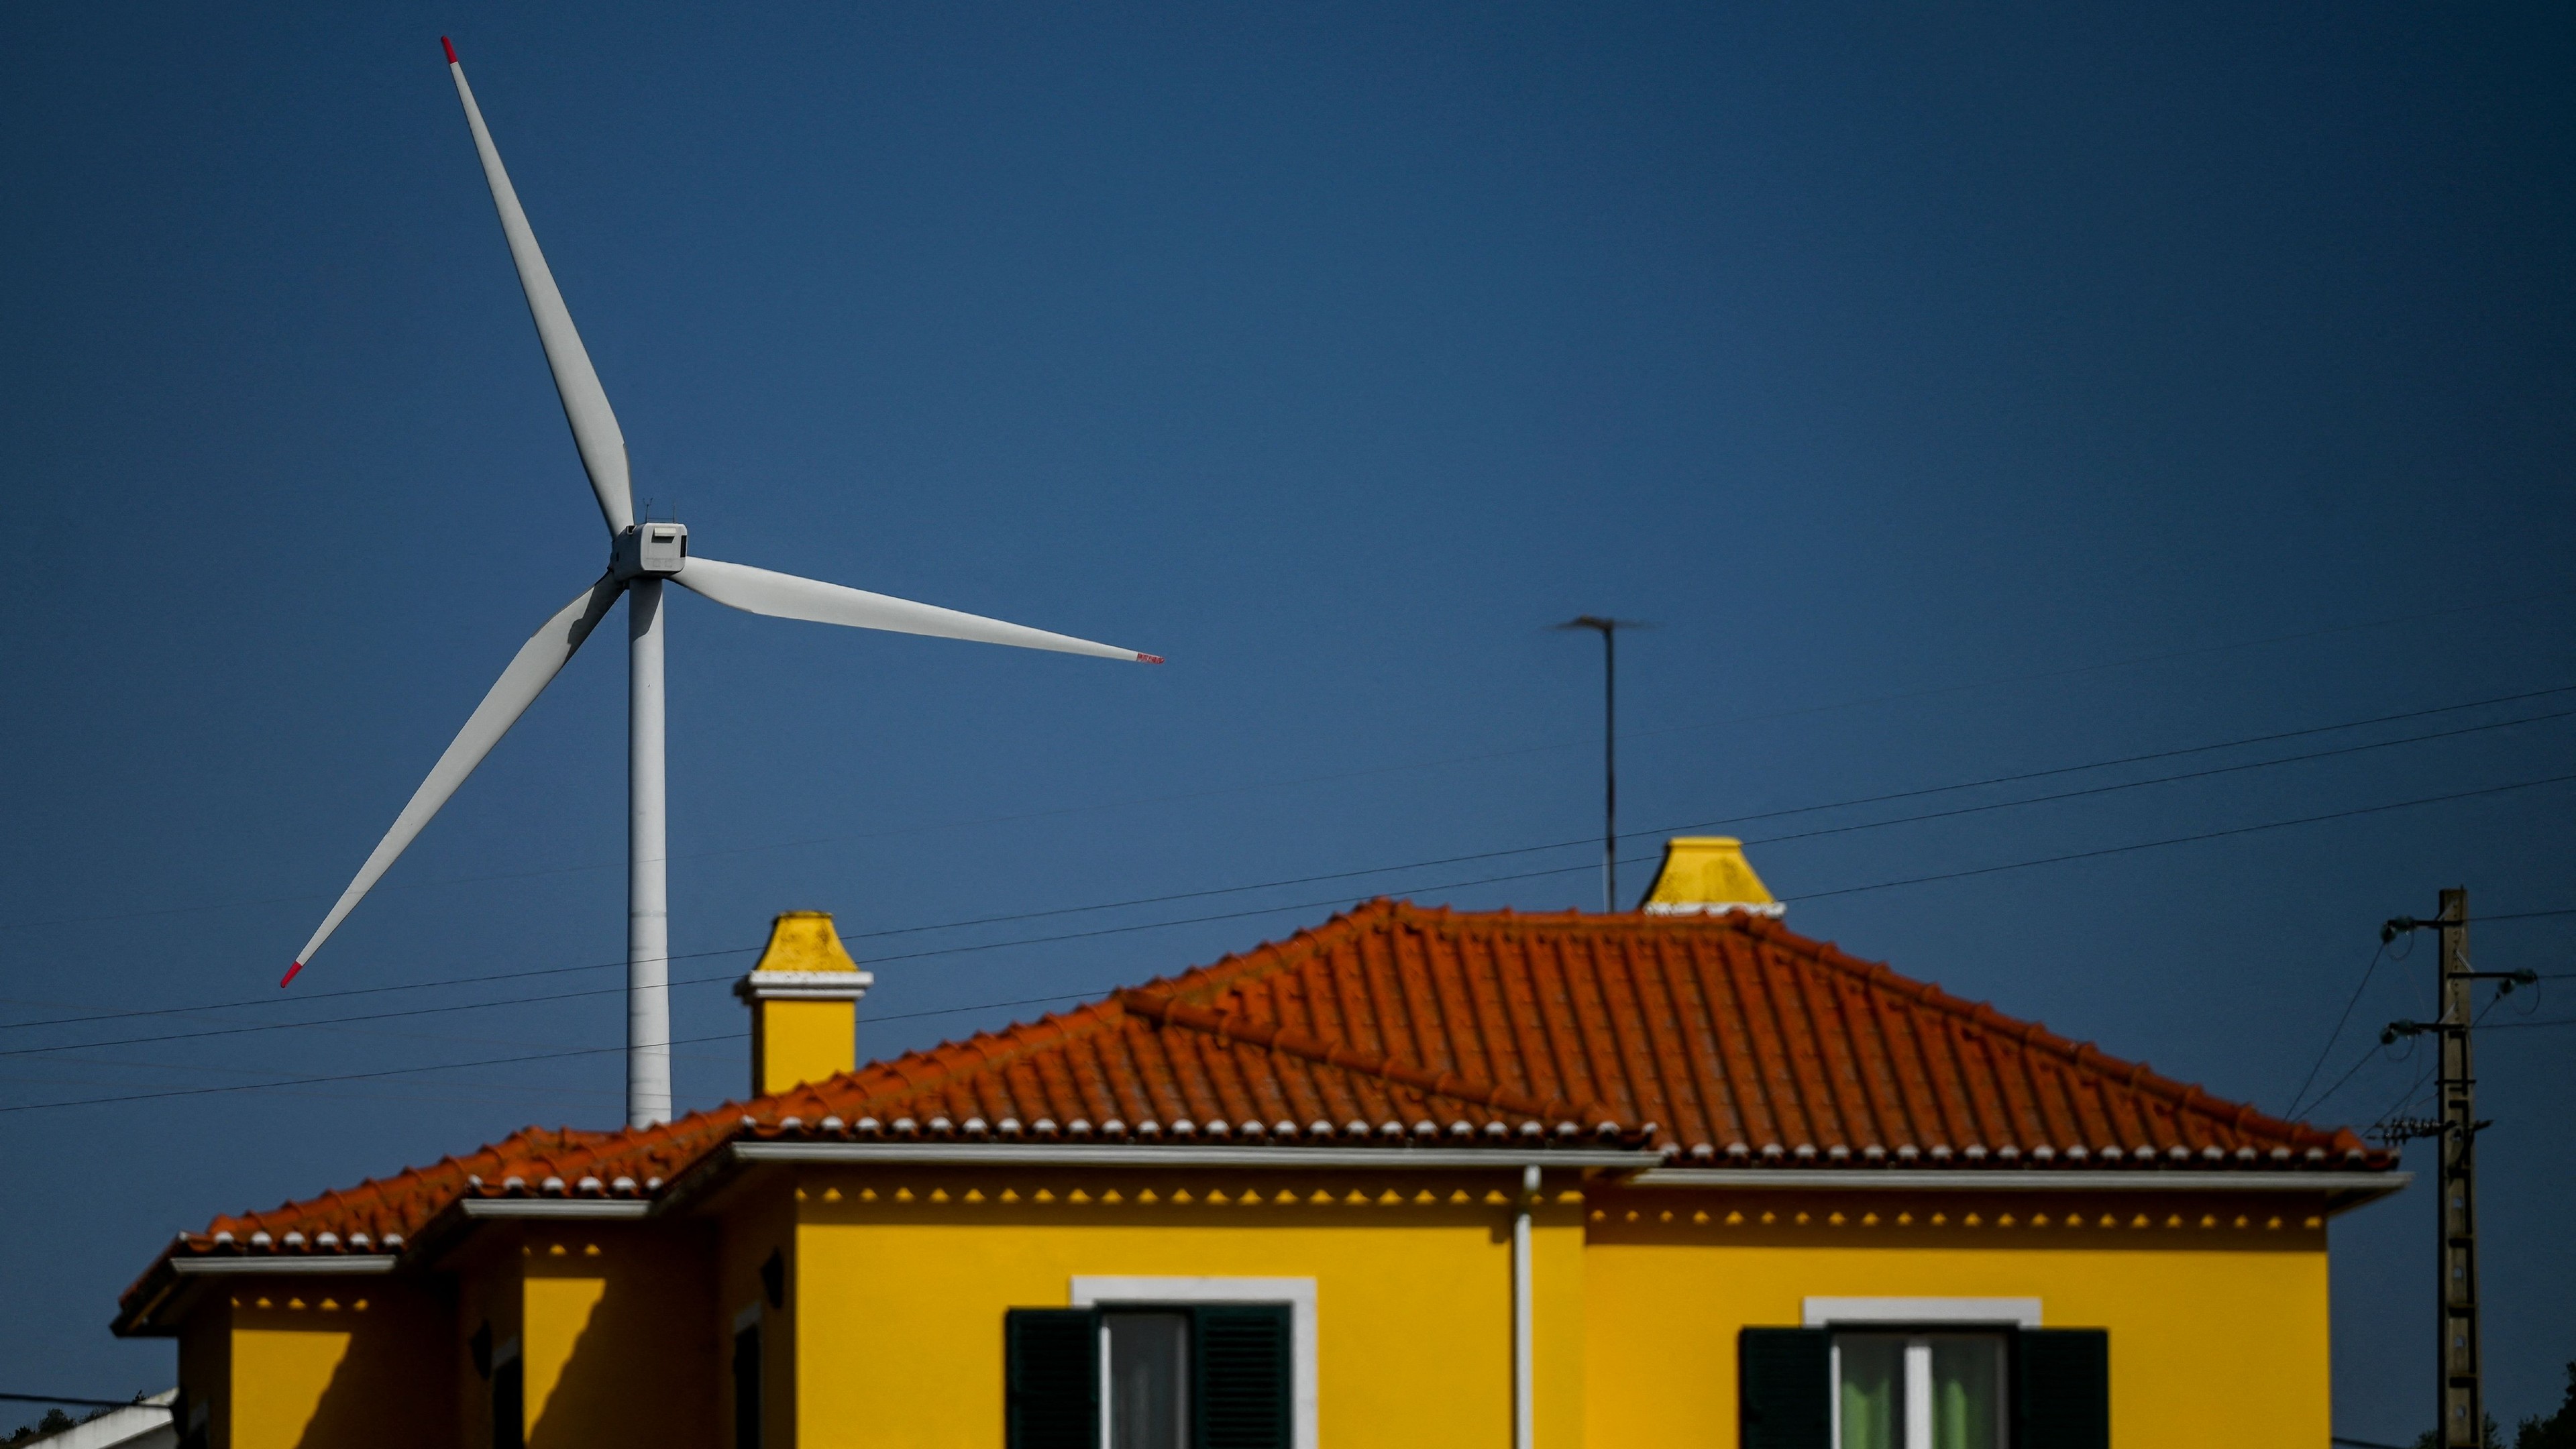 A huge wind turbine sticks out behind a yellow house with red terracotta roof tiles.